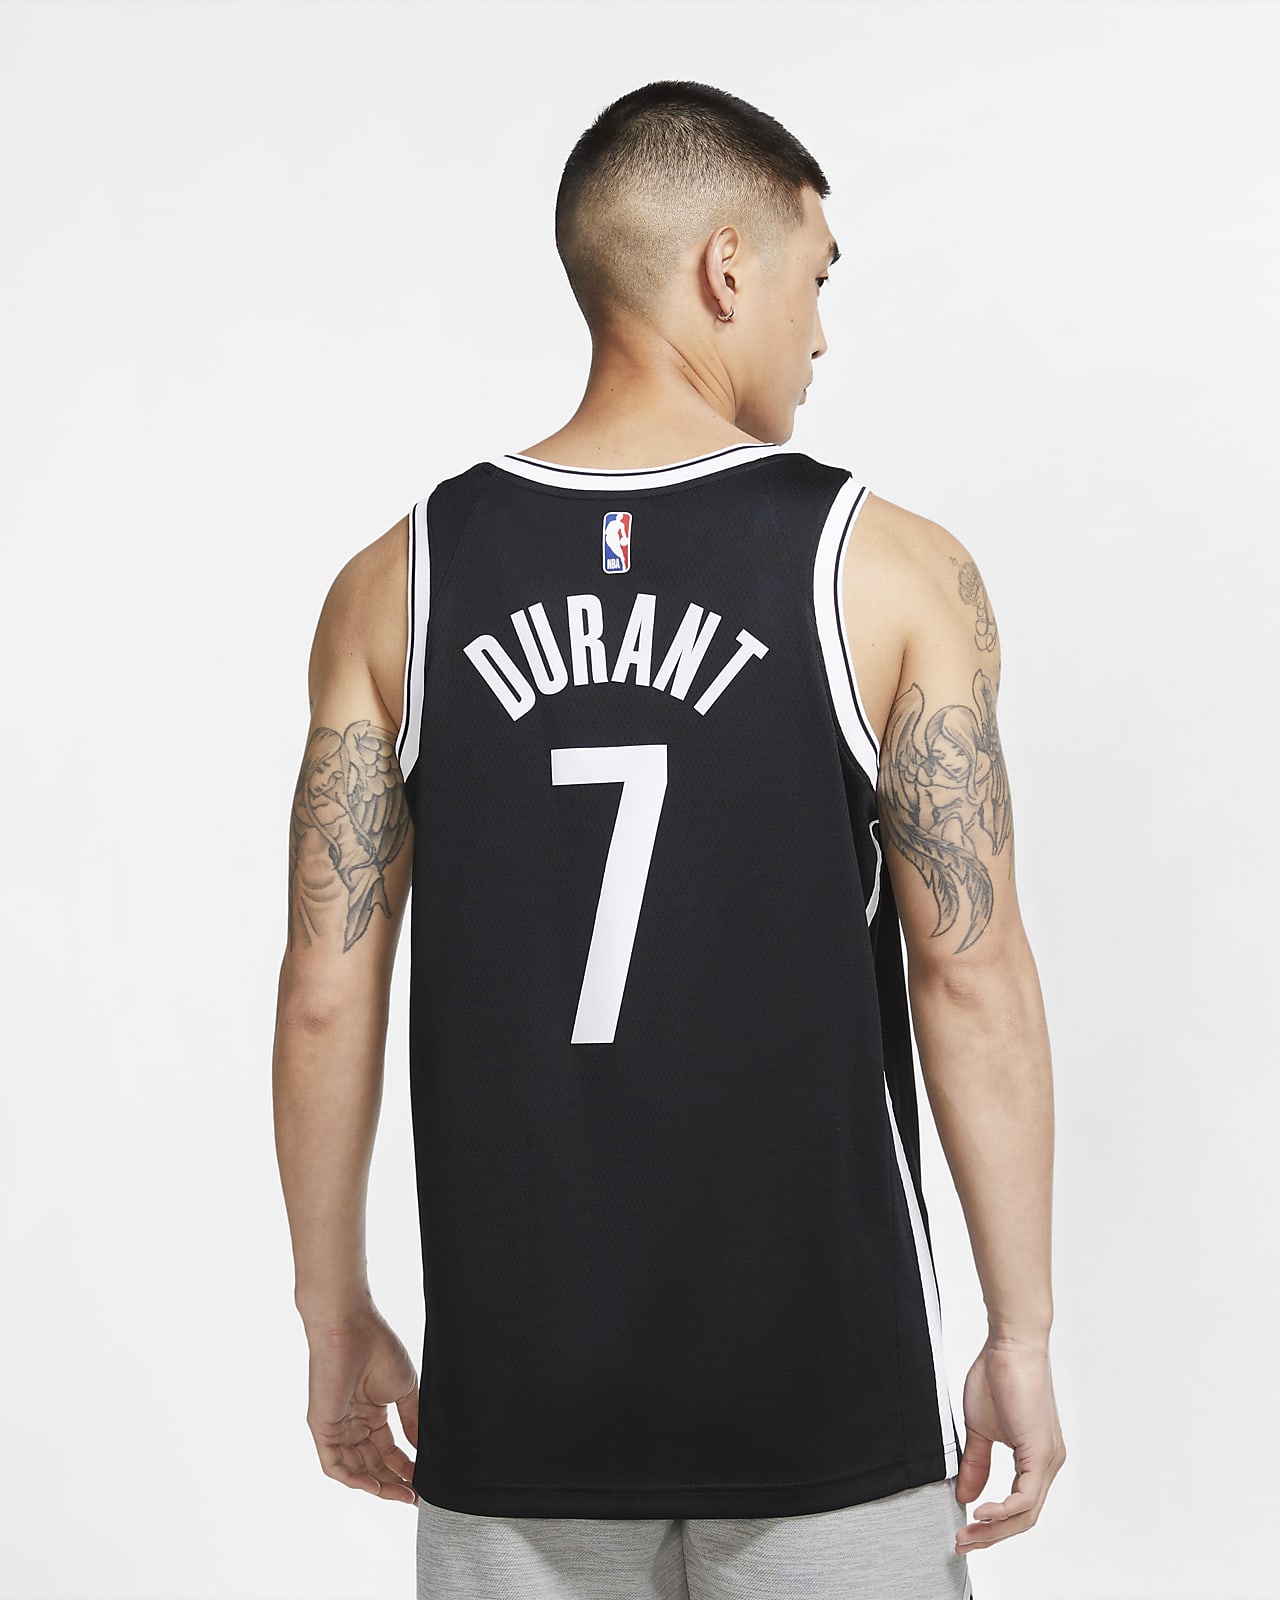 kevin durant in nets jersey